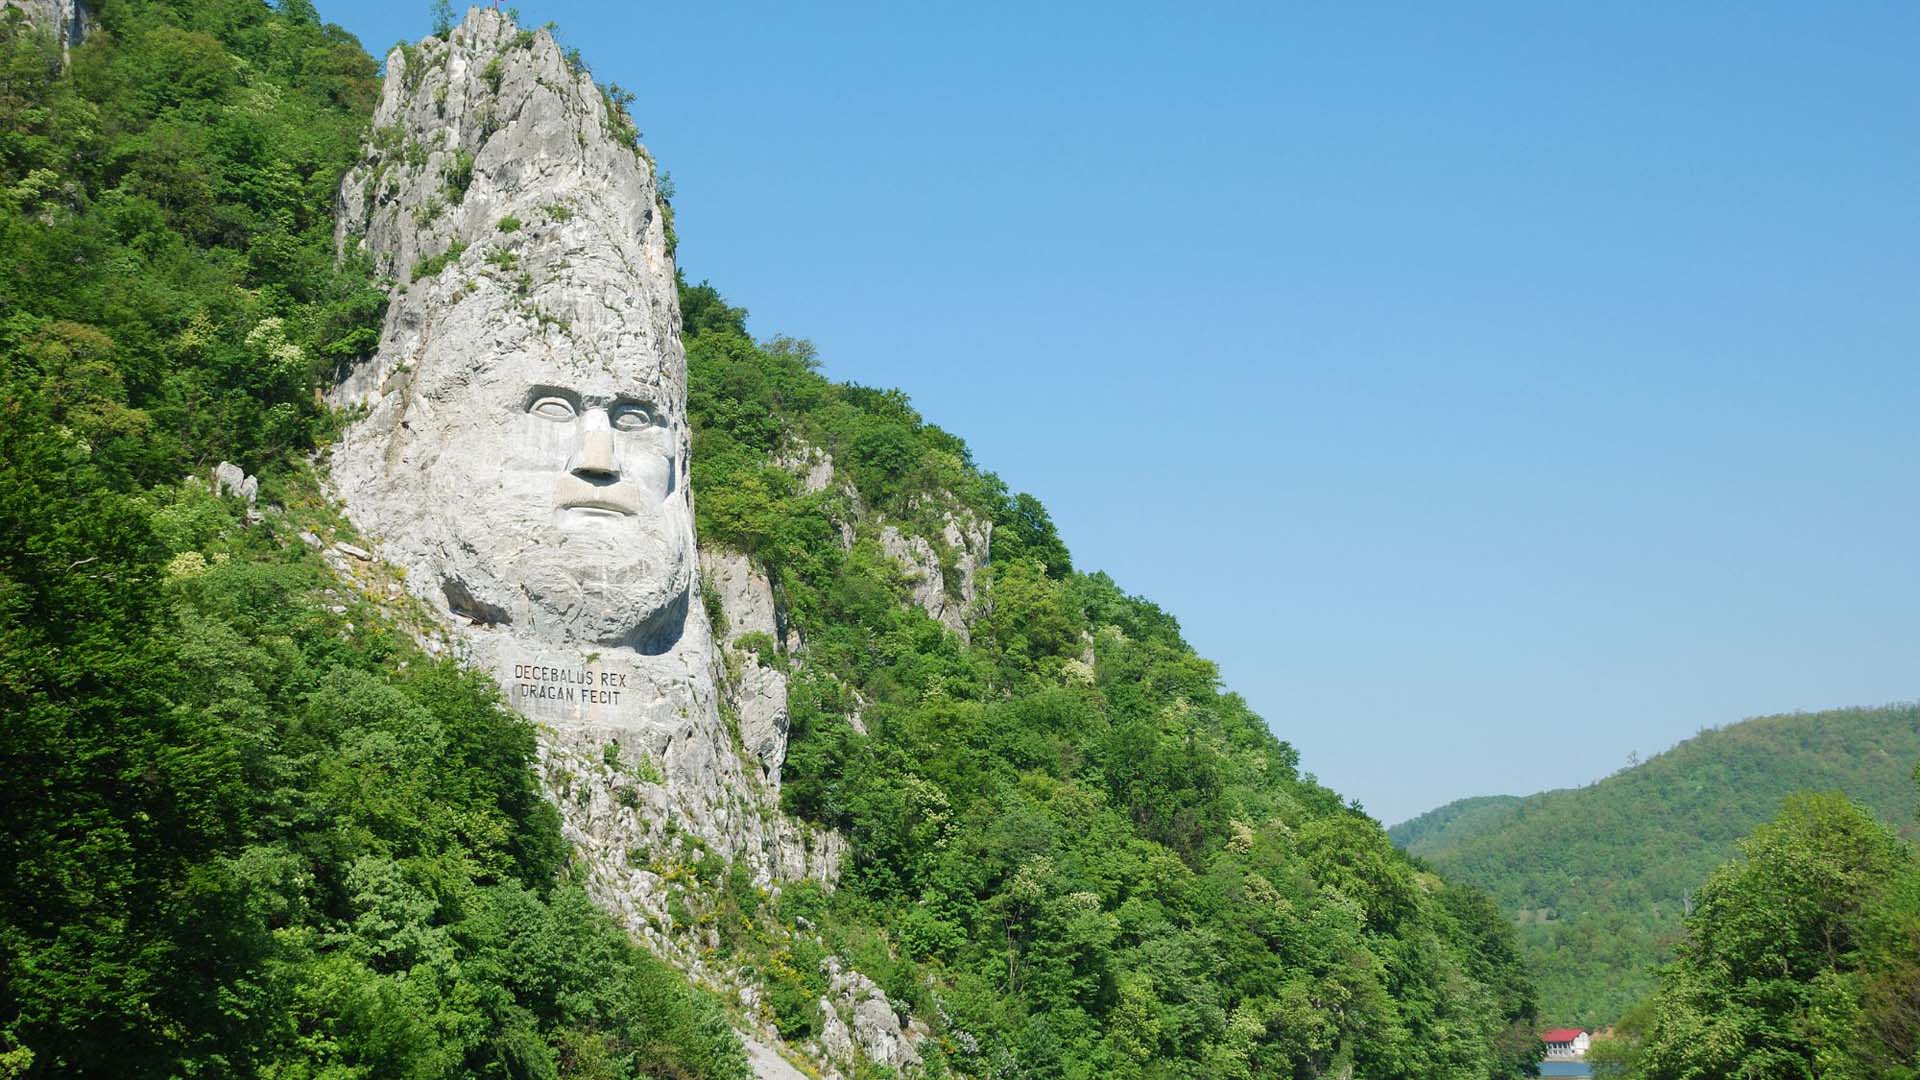 Decebalus statue and entrance in Mraconia gulf on Danube